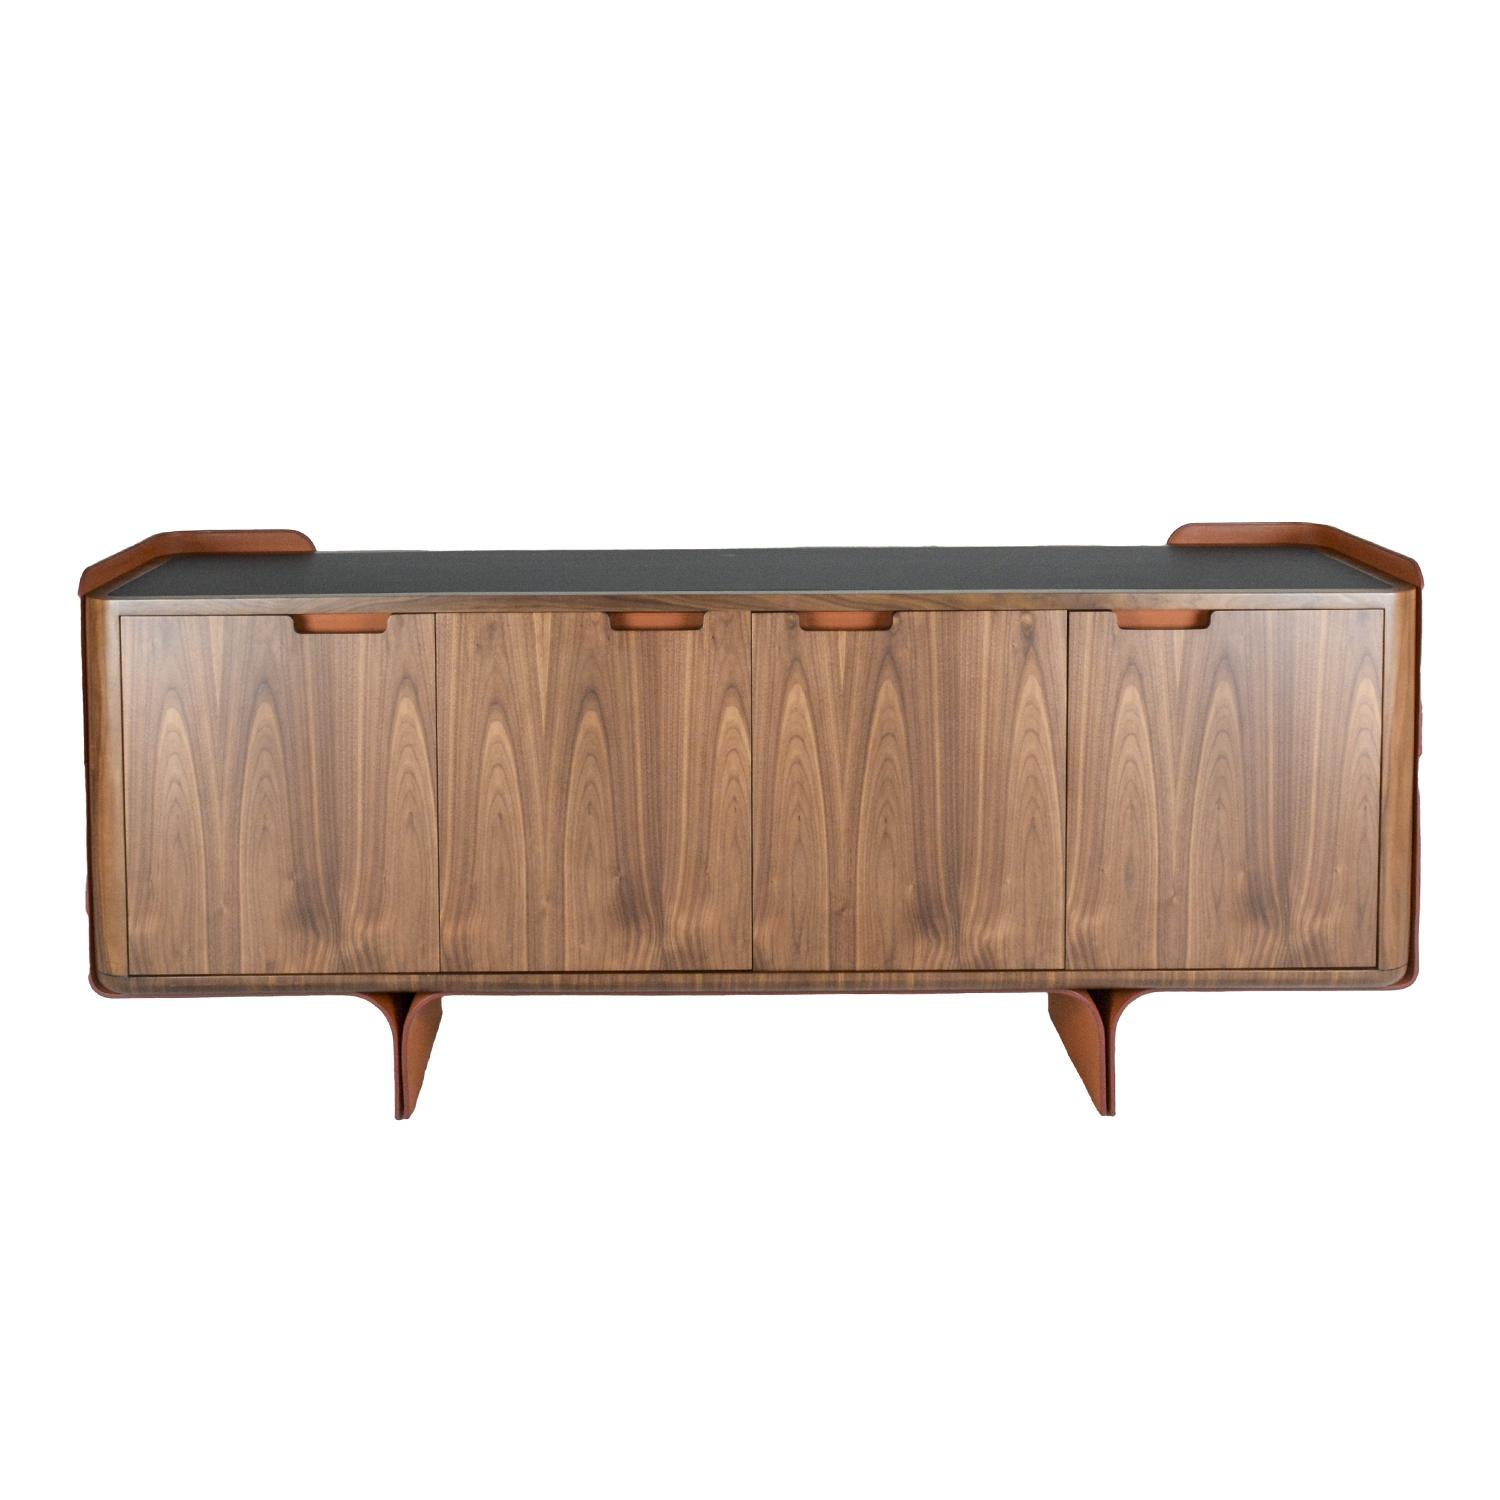 The strong wood body of this sideboard is suspended in the air by a base of bent leather “slabs” that reveal the true craftsmanship of leather in a poetic way. Pierre adds character into a common piece of furniture by taking details that make a